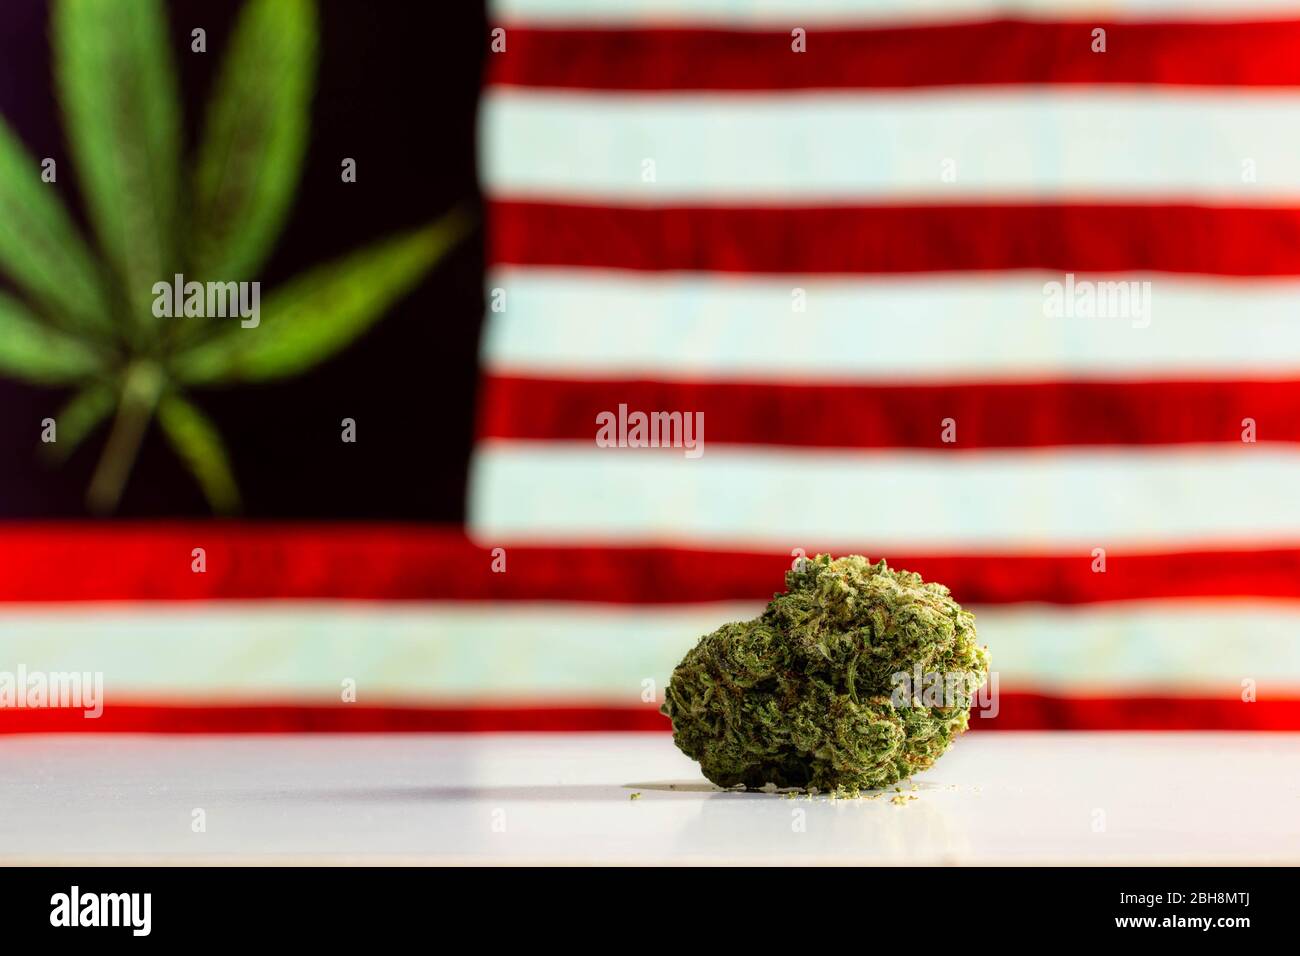 Cannabis flower nugget on a table in front of an American flag with a Marijuana pot leaf. Stock Photo